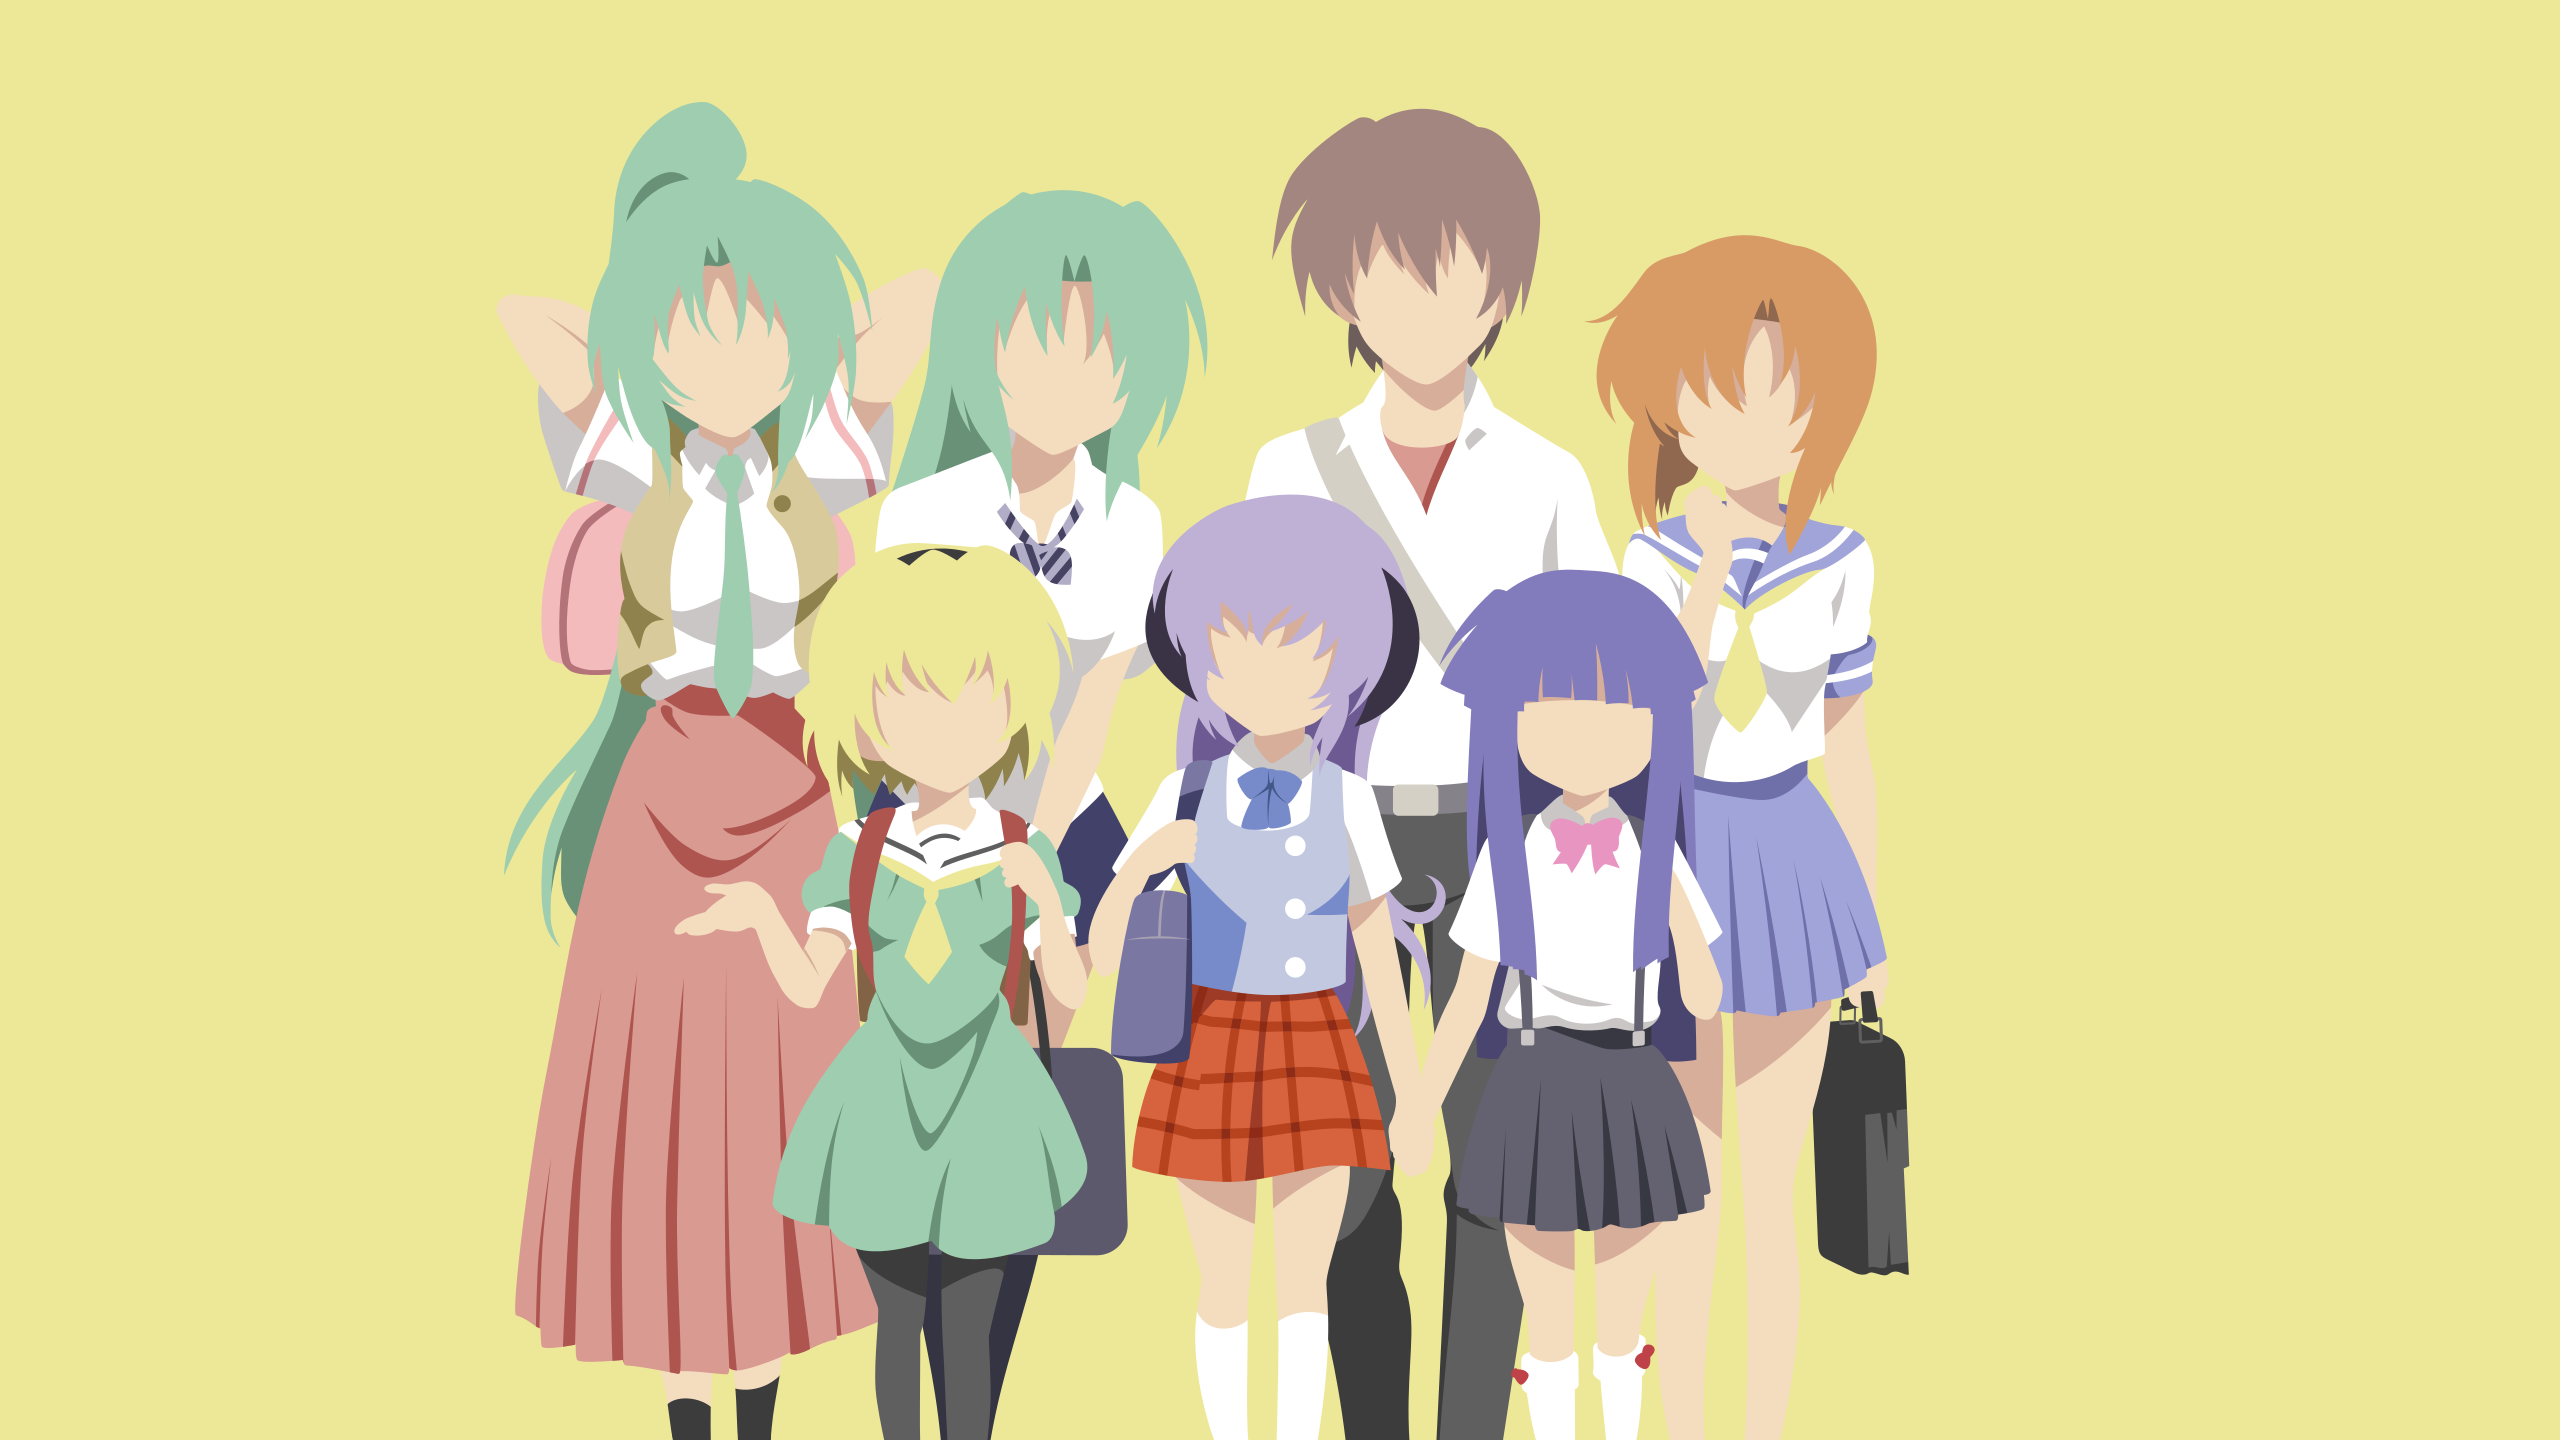 Higurashi When They Cry - Ch.1 Onikakushi HD Wallpapers and Backgrounds. 